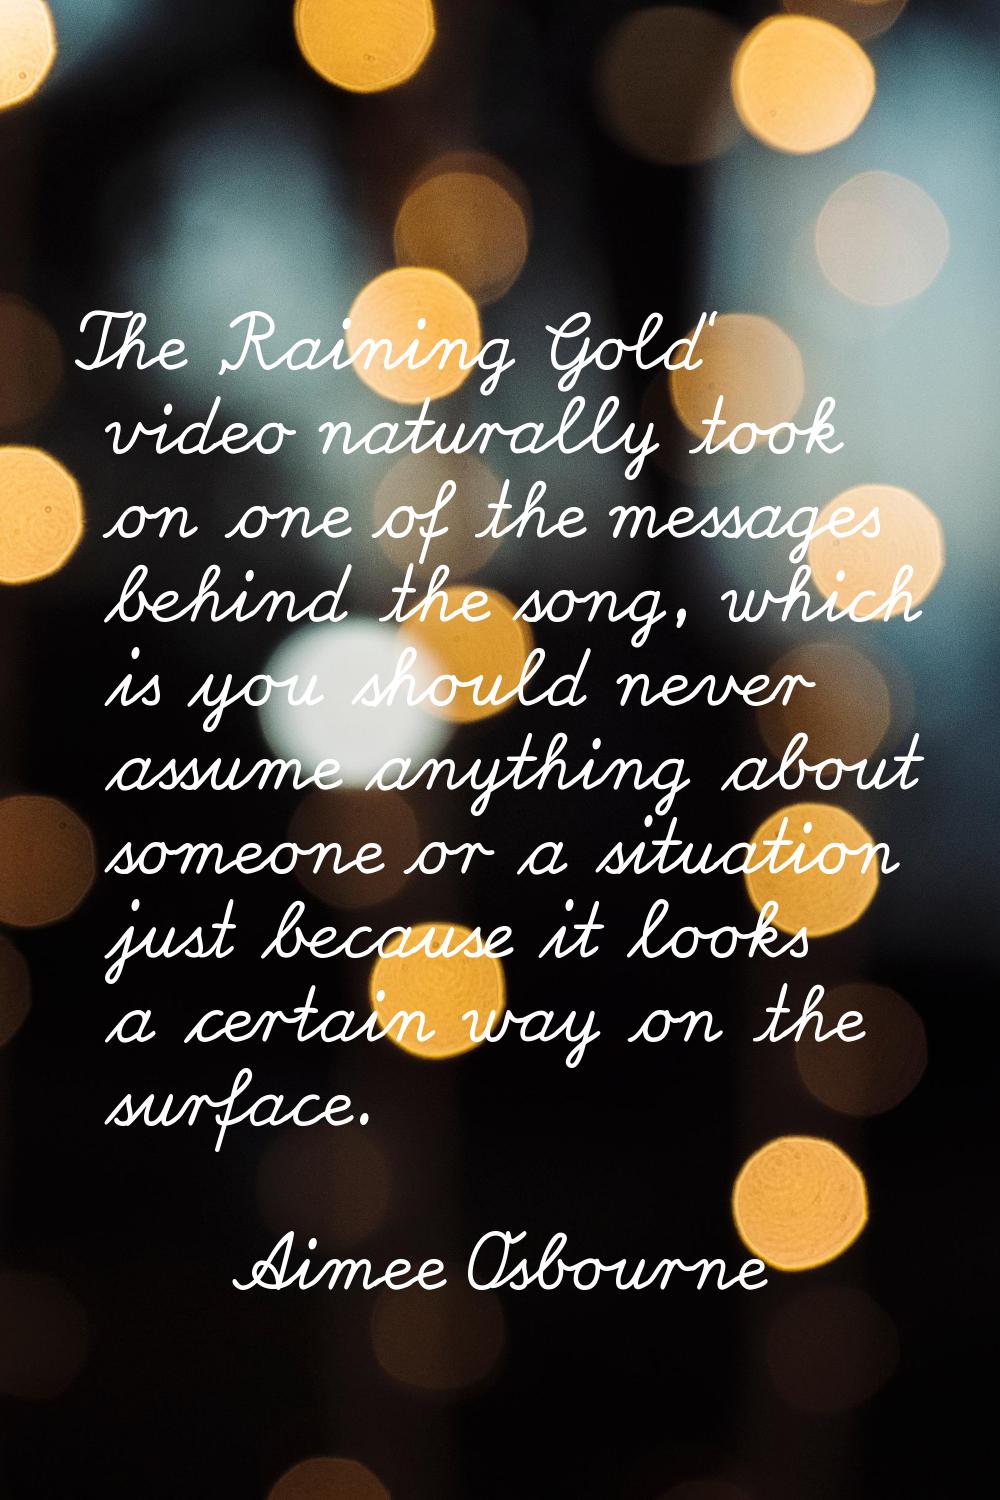 The 'Raining Gold' video naturally took on one of the messages behind the song, which is you should